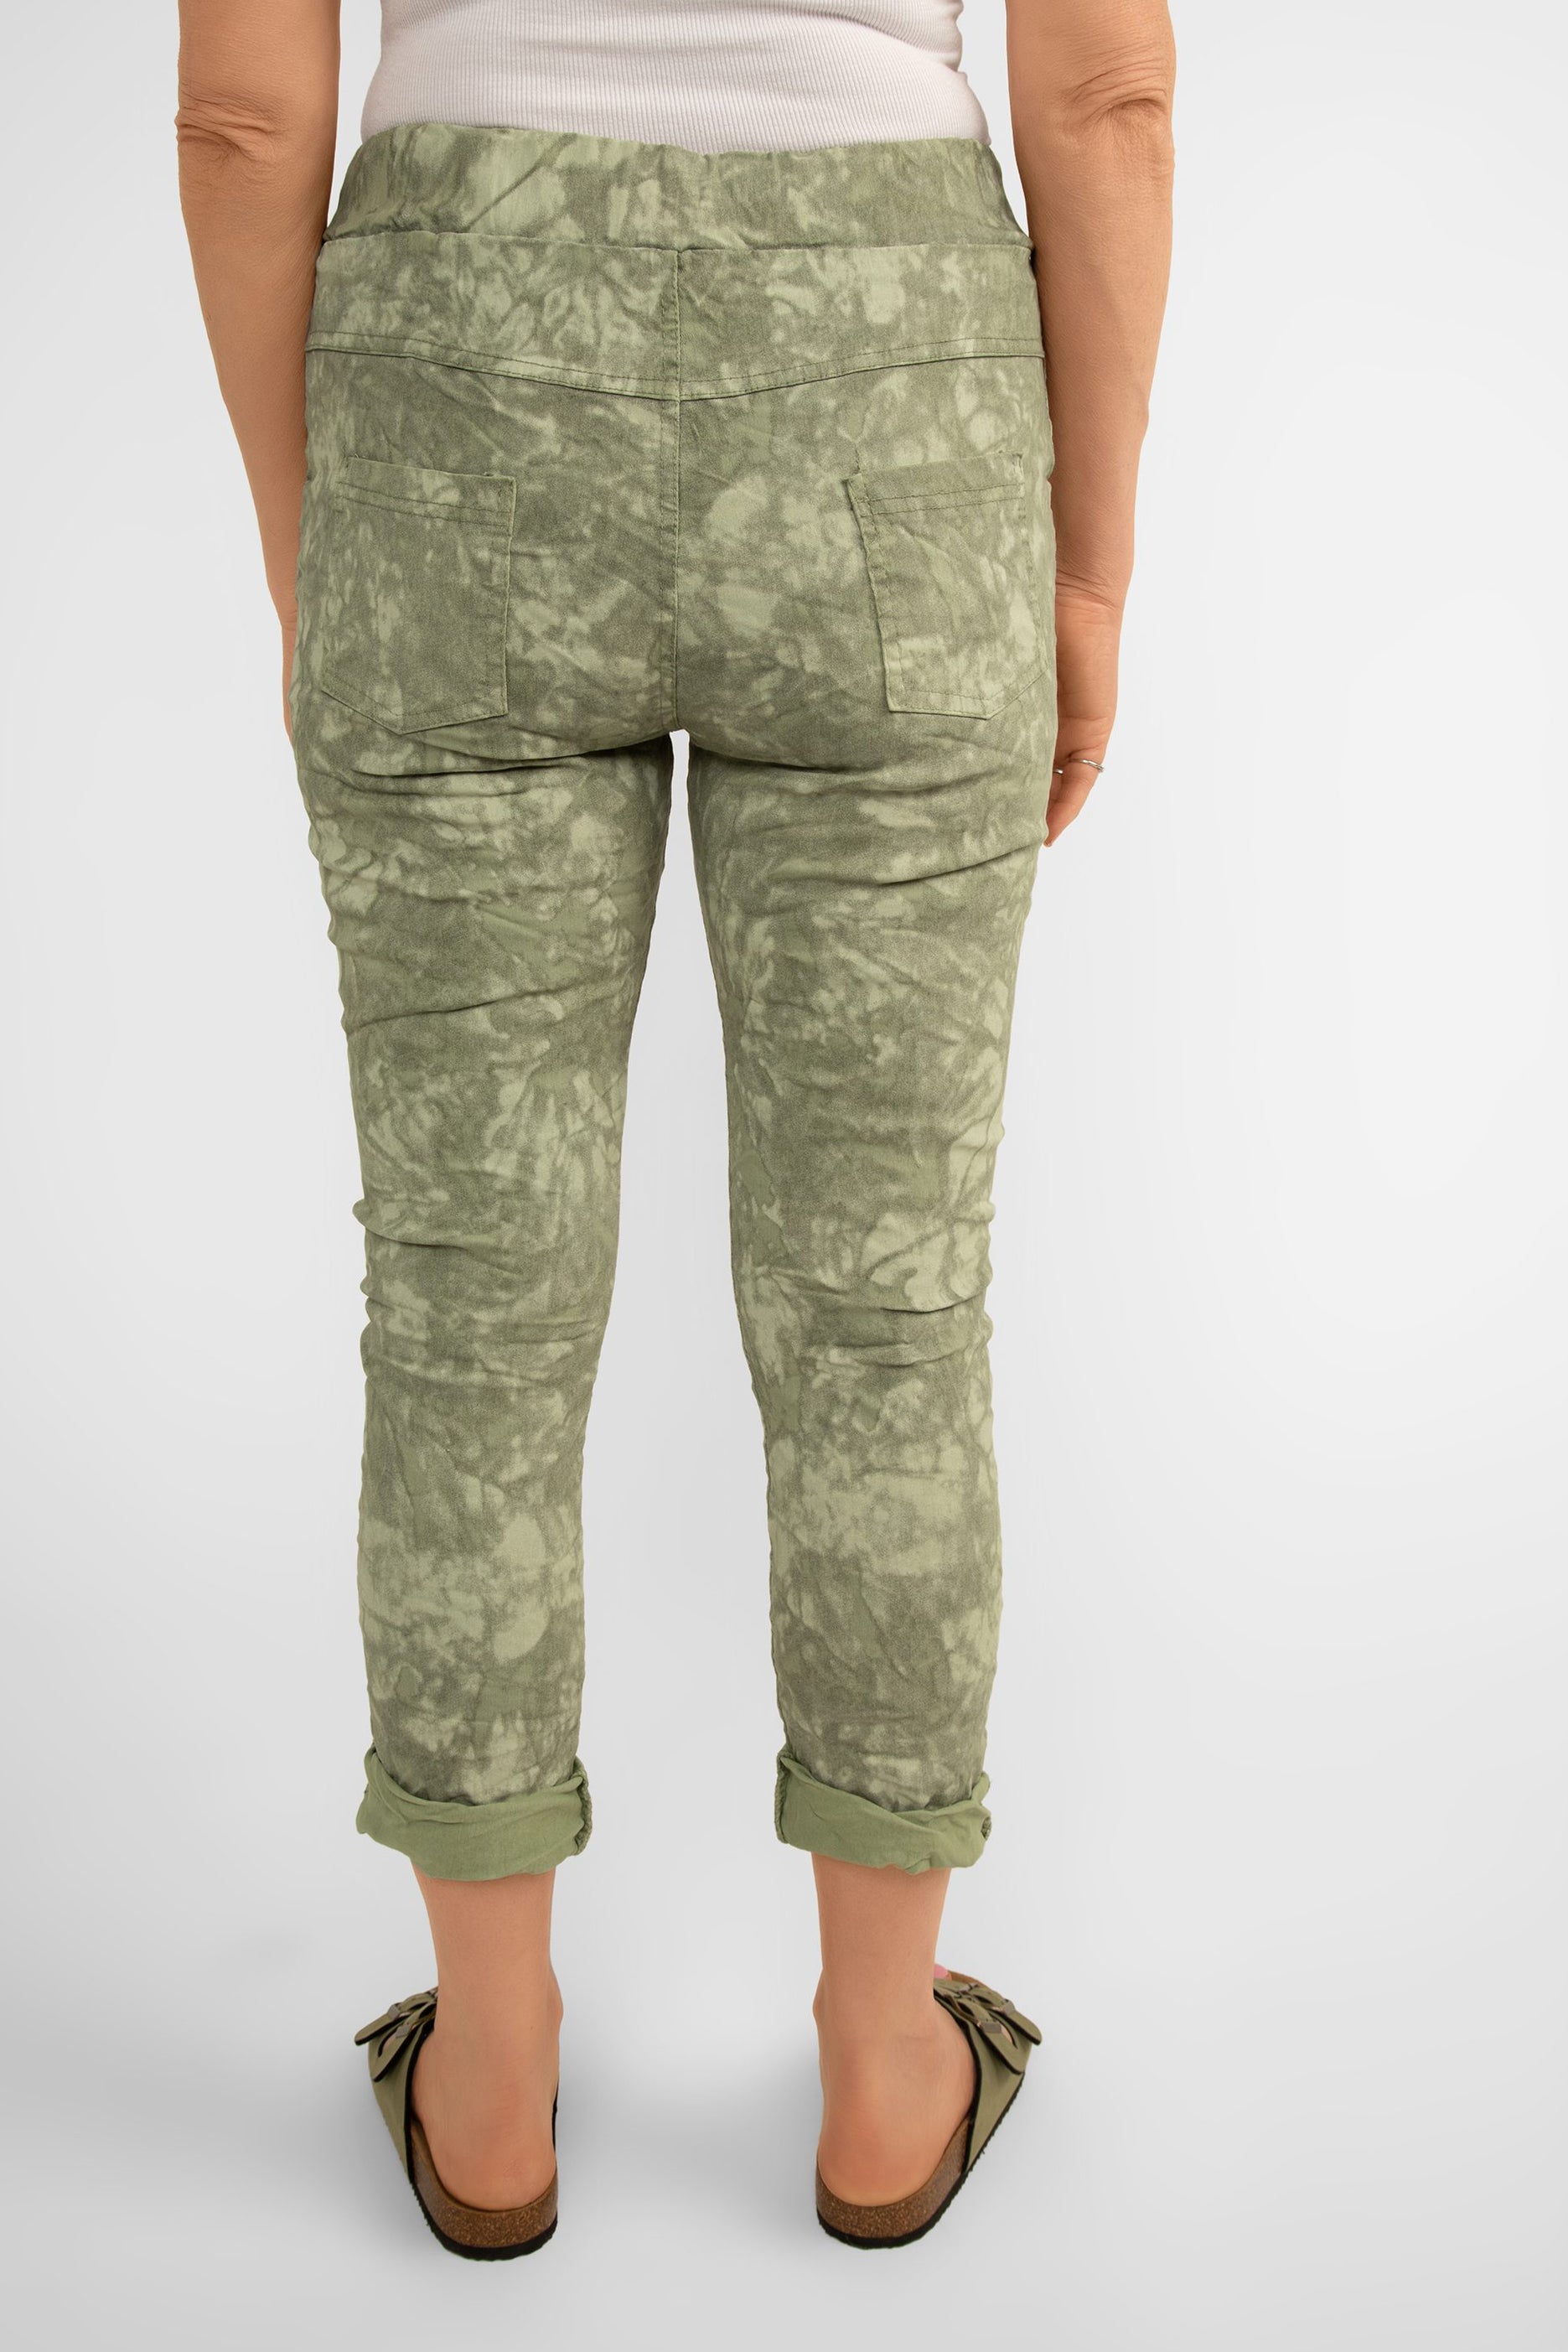 Back view of Bella Amore (21287) Women's Slim Fit Cropped Crinkle Pants with Side Pockets and Drawstring Waist, in Military green tie dye print